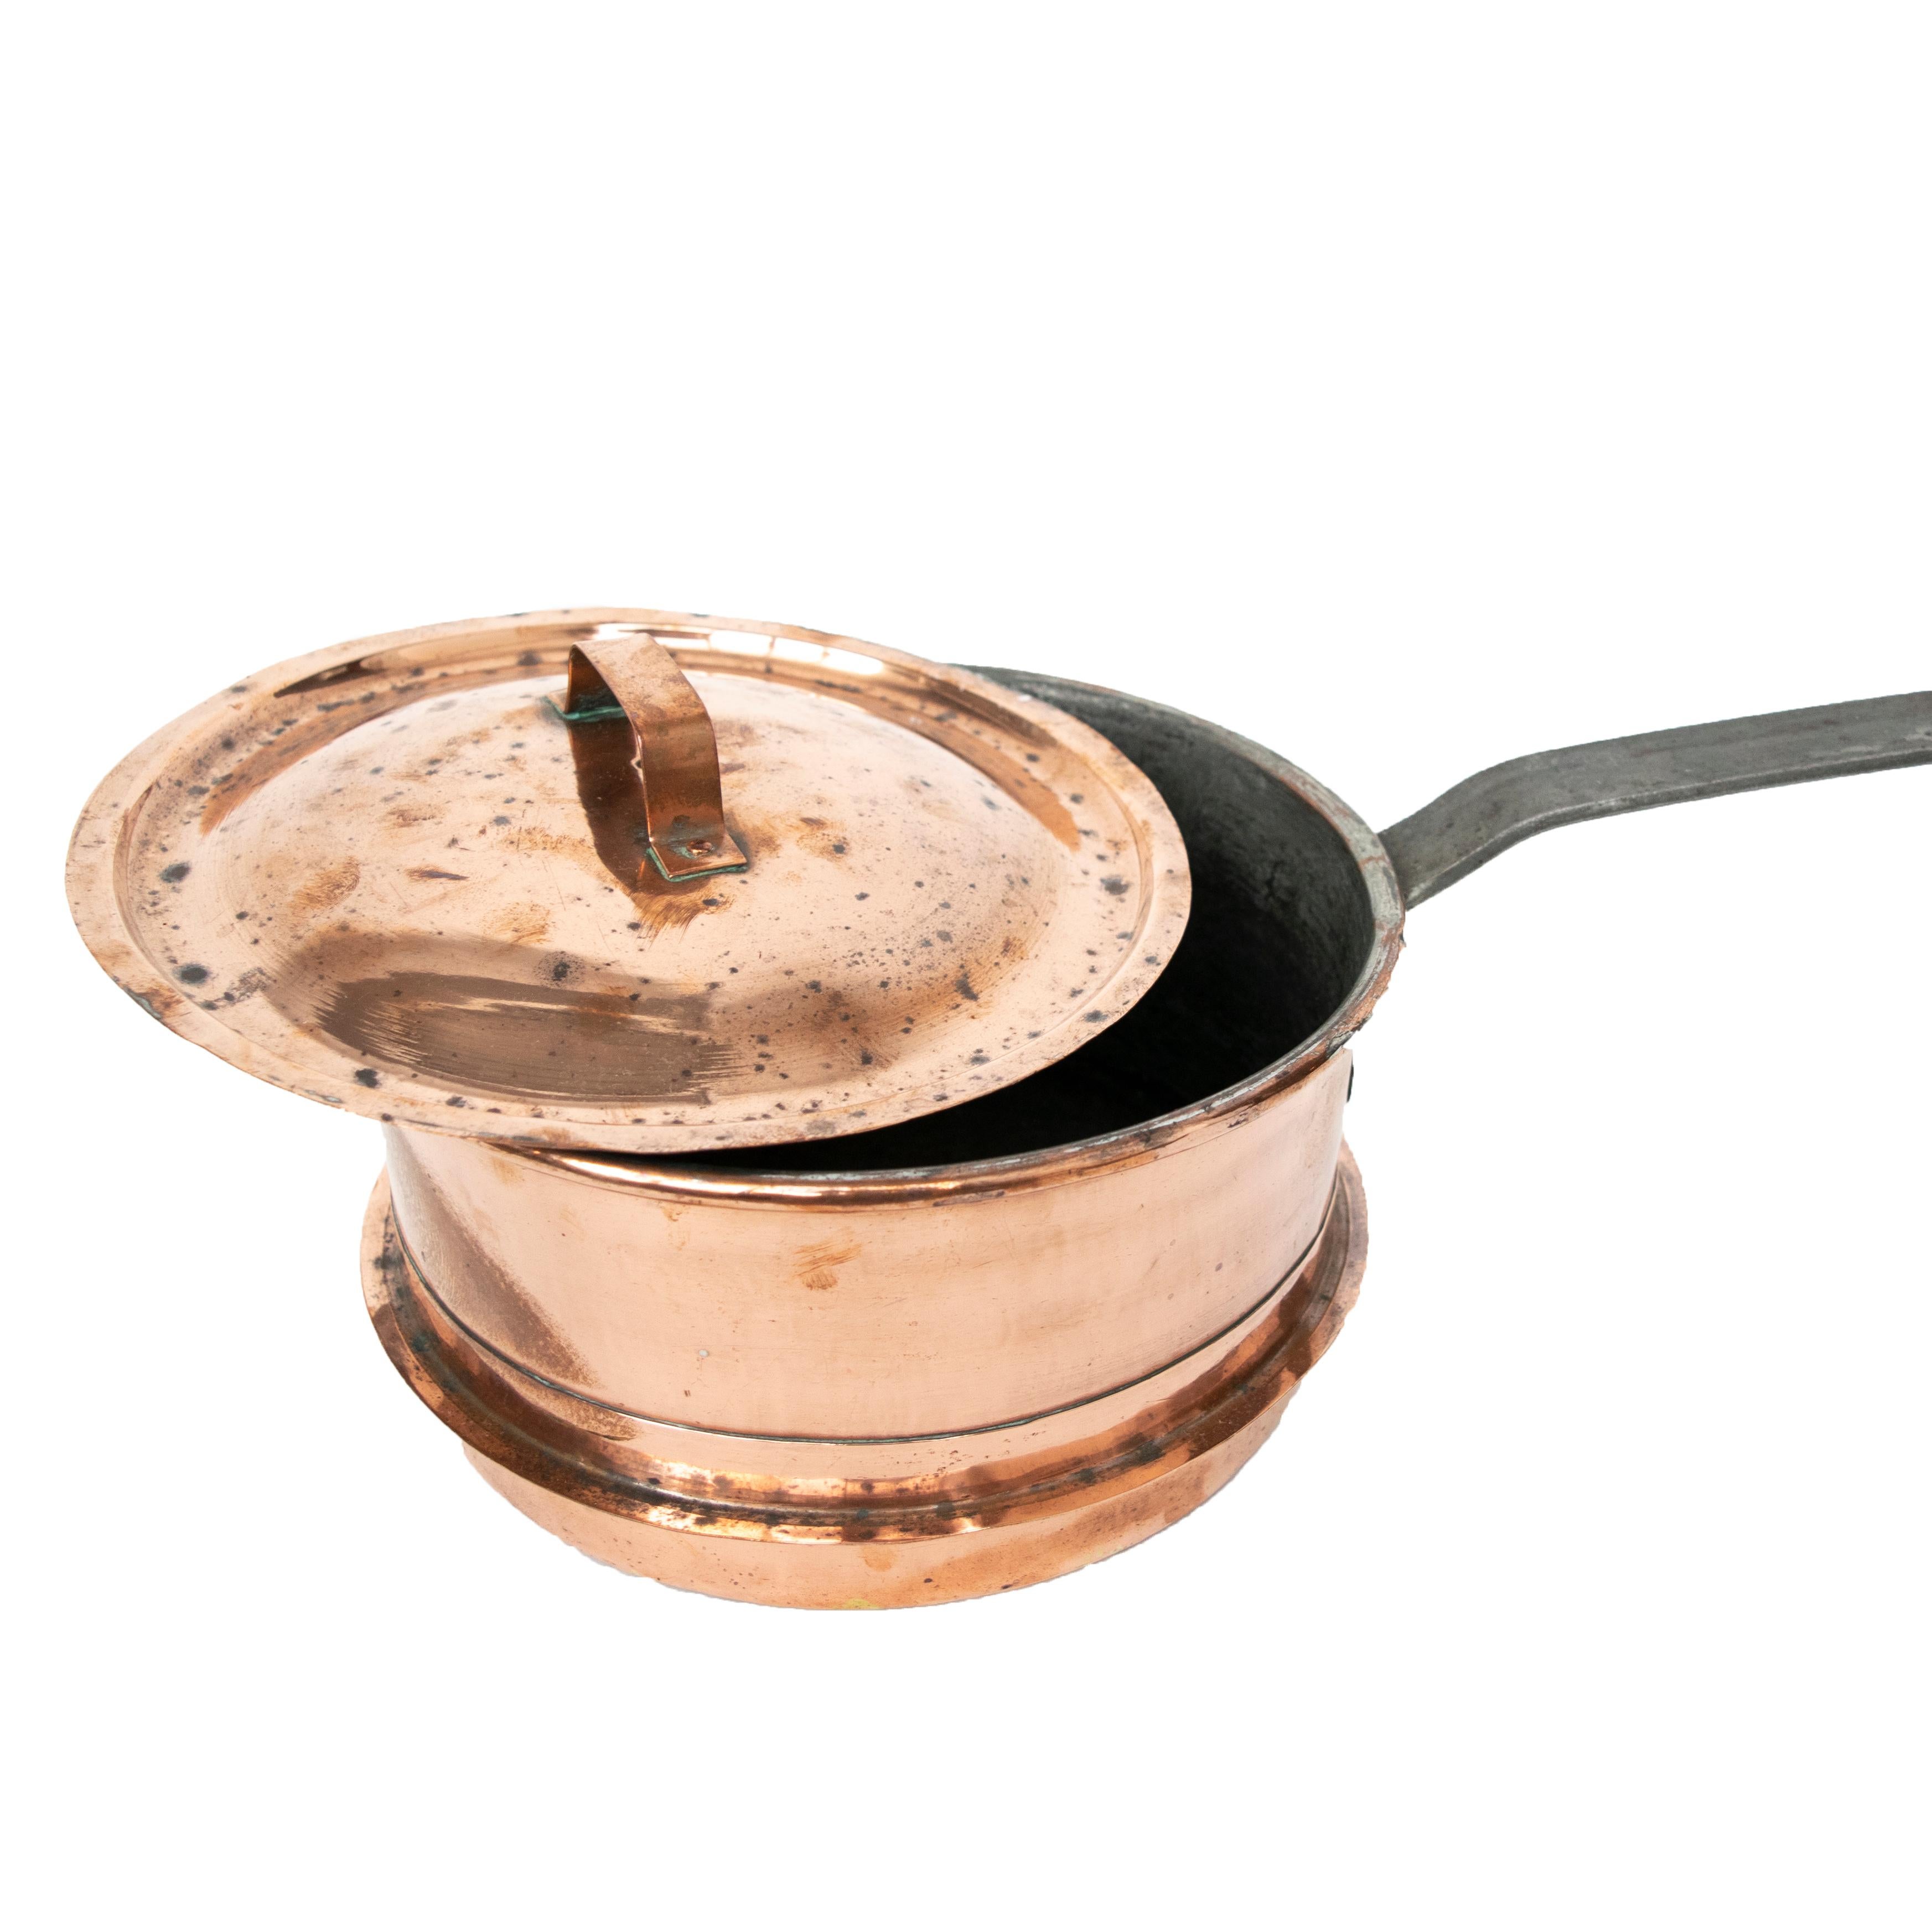 Swedish Antique Copper Saucepan with Cast Iron Handle, Small Size from Sweden Late 1800 For Sale